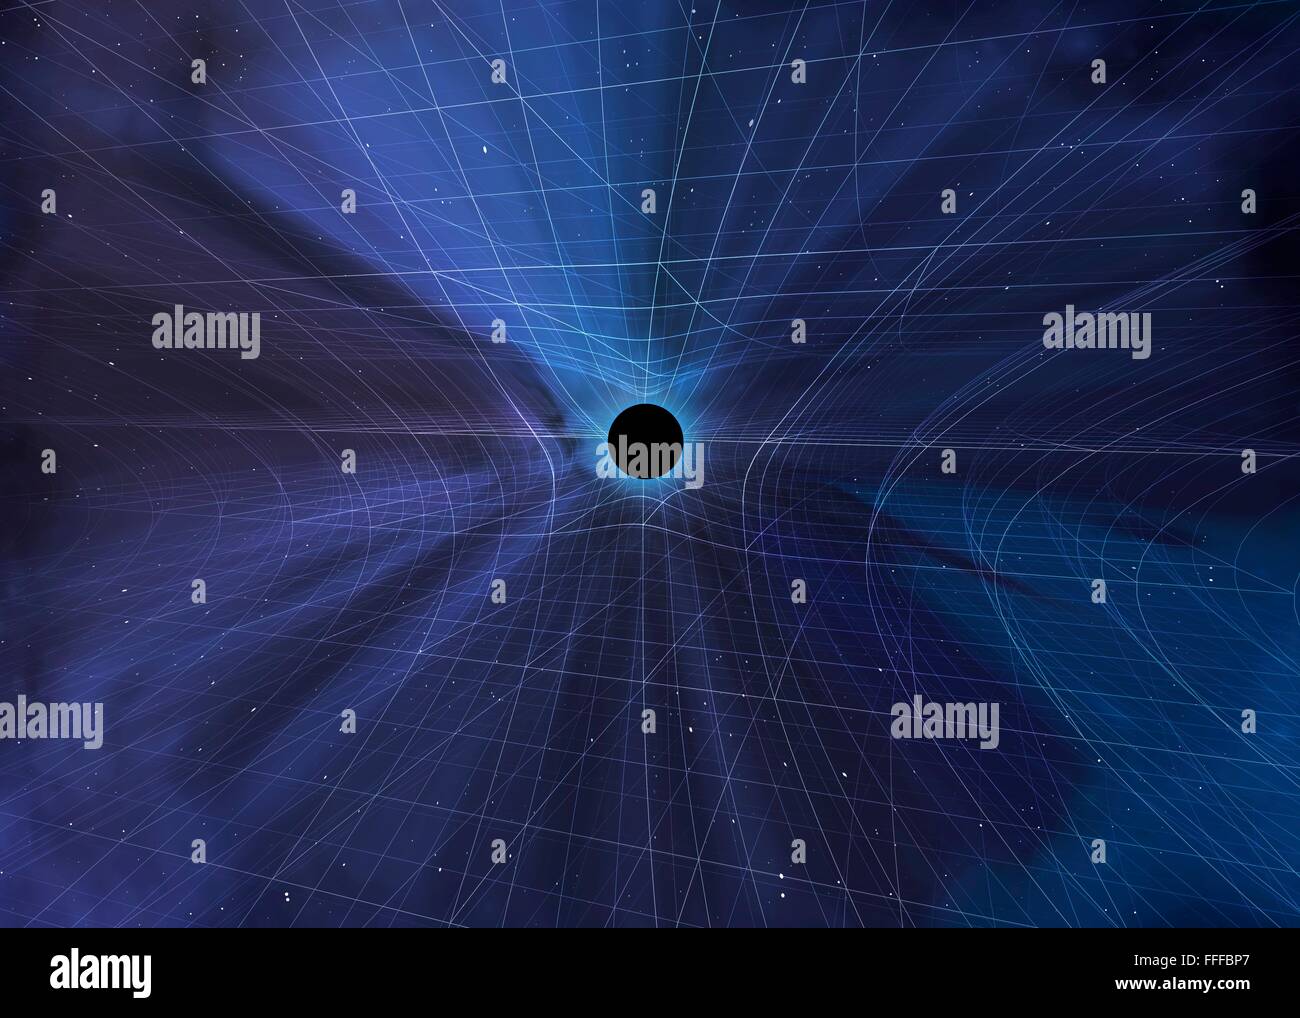 Curvature of space-time. Computer artwork of a black hole curving space-time according to Einstein's General Theory of Stock Photo